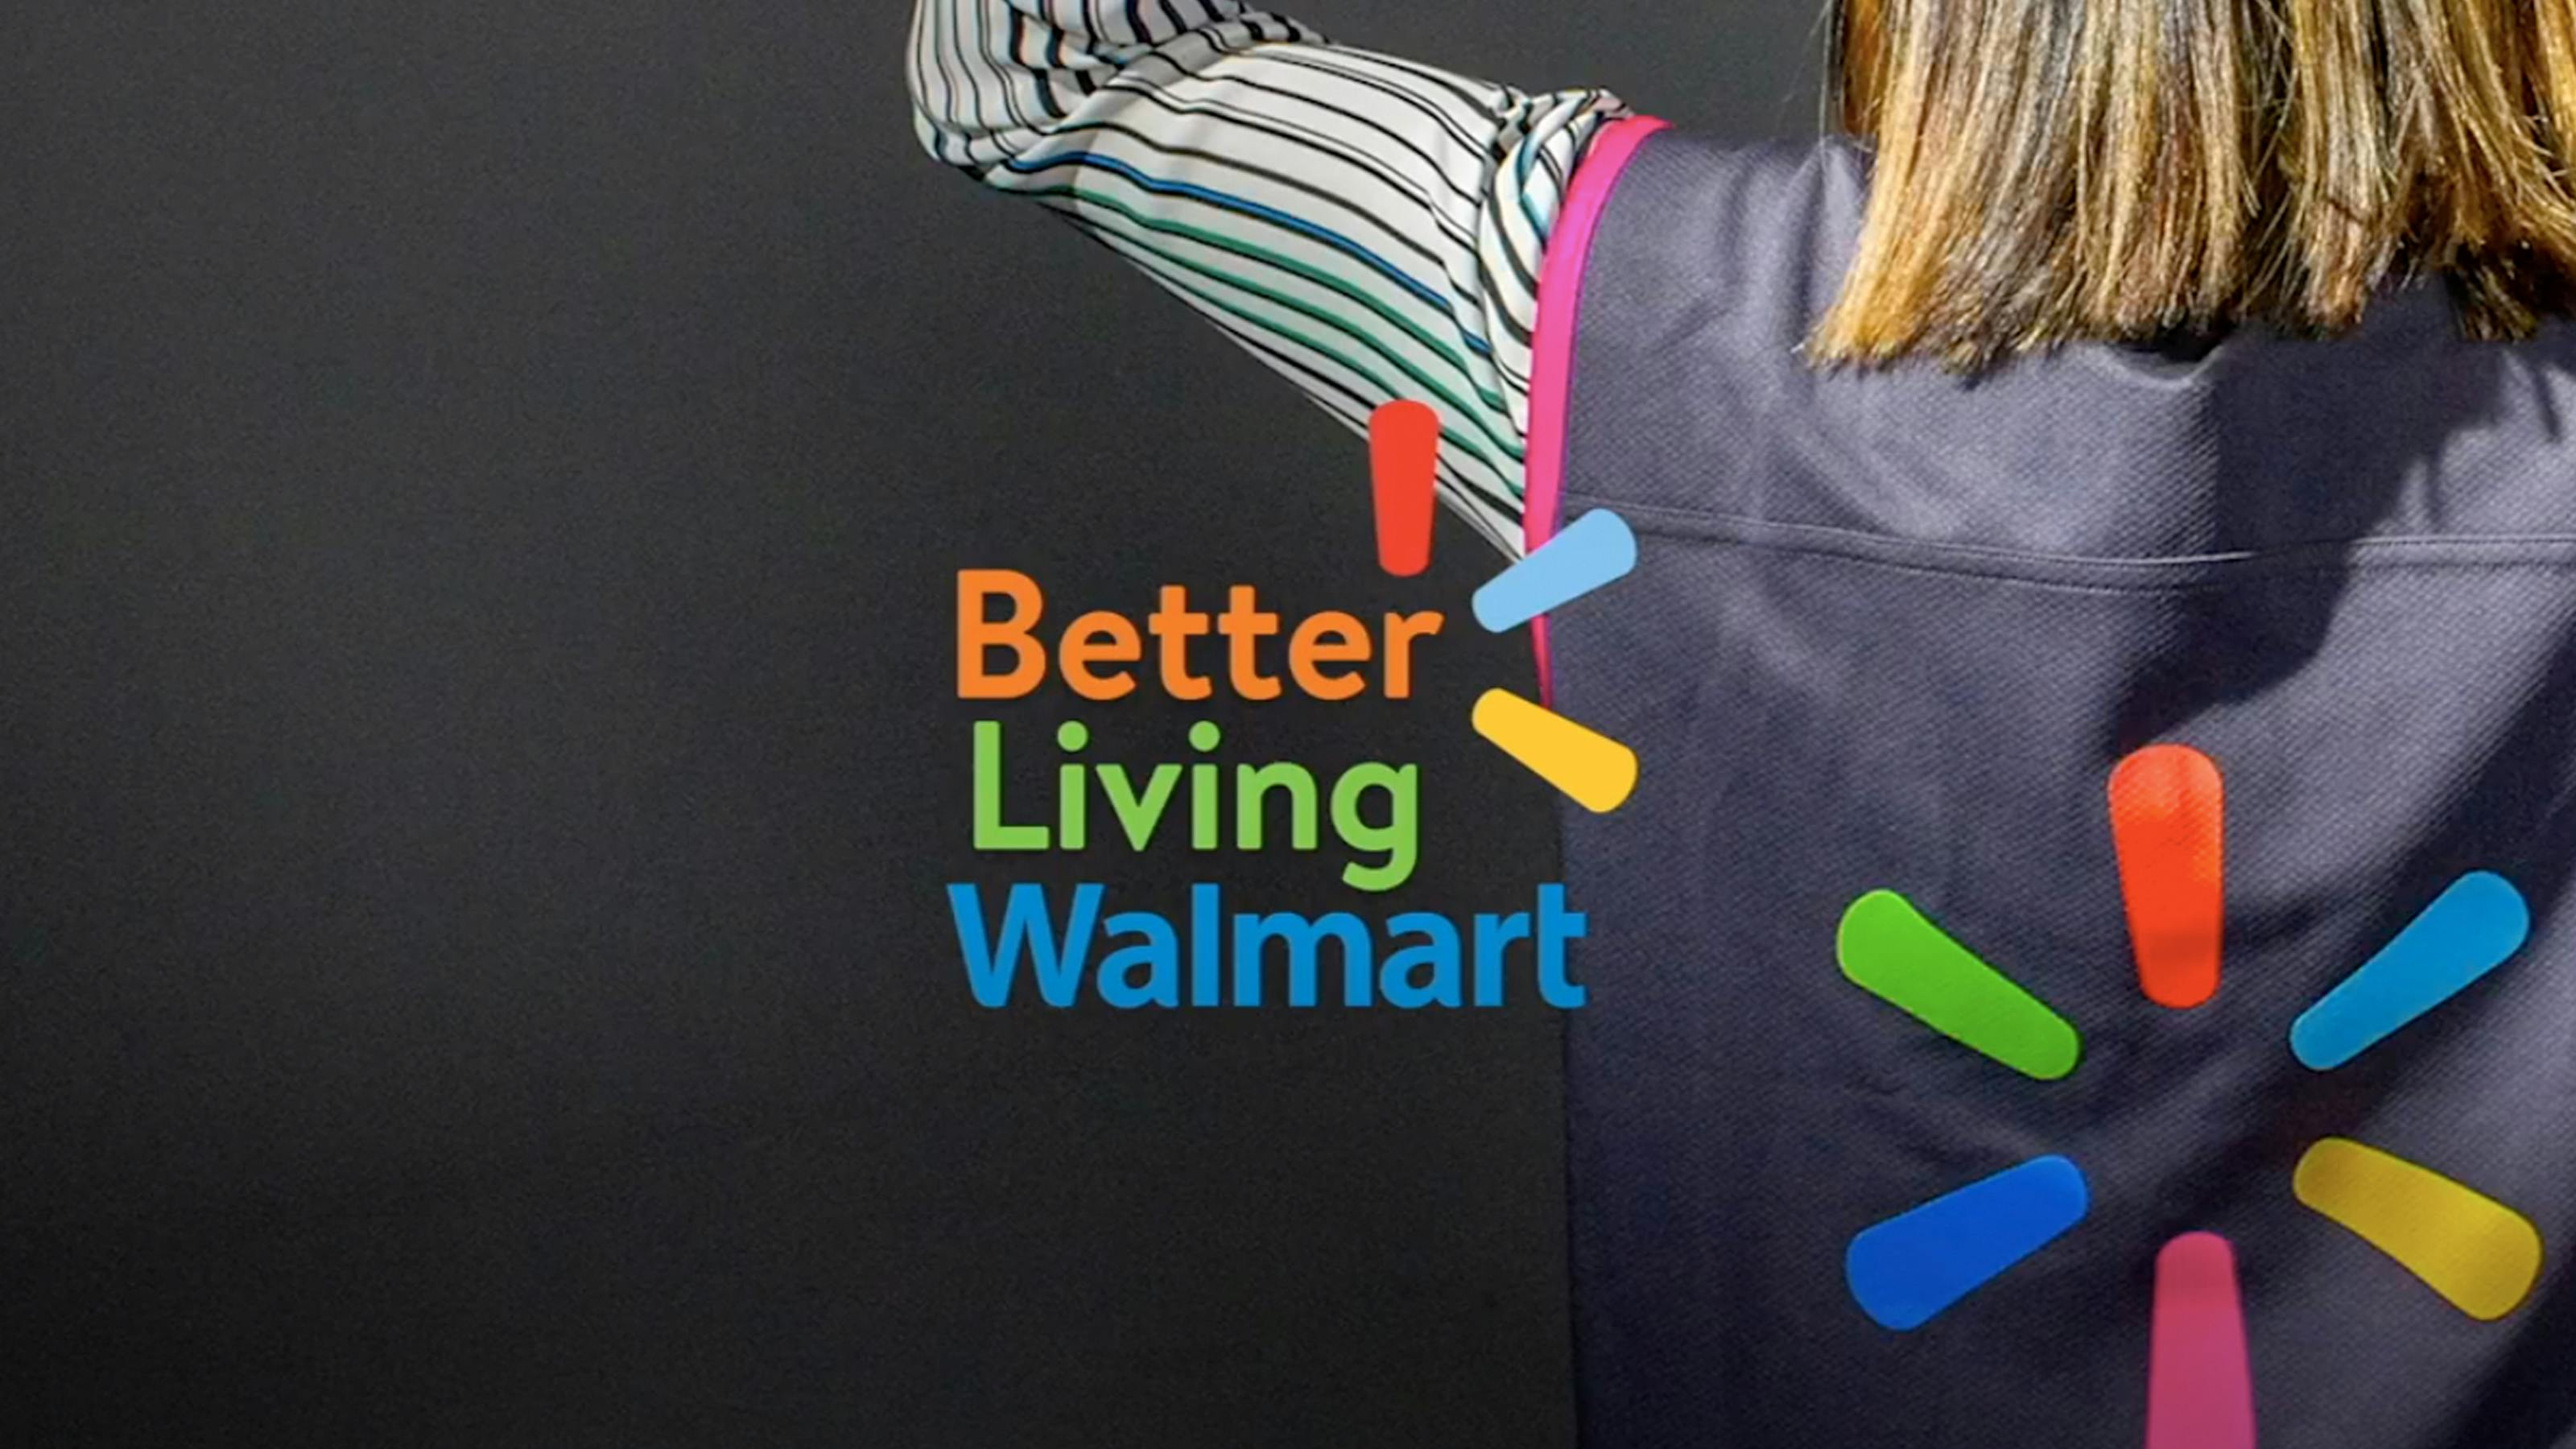 Close-up of a woman’s back. She wears a long sleeve and a vest. The overlaid text reads “Better Living Walmart.”